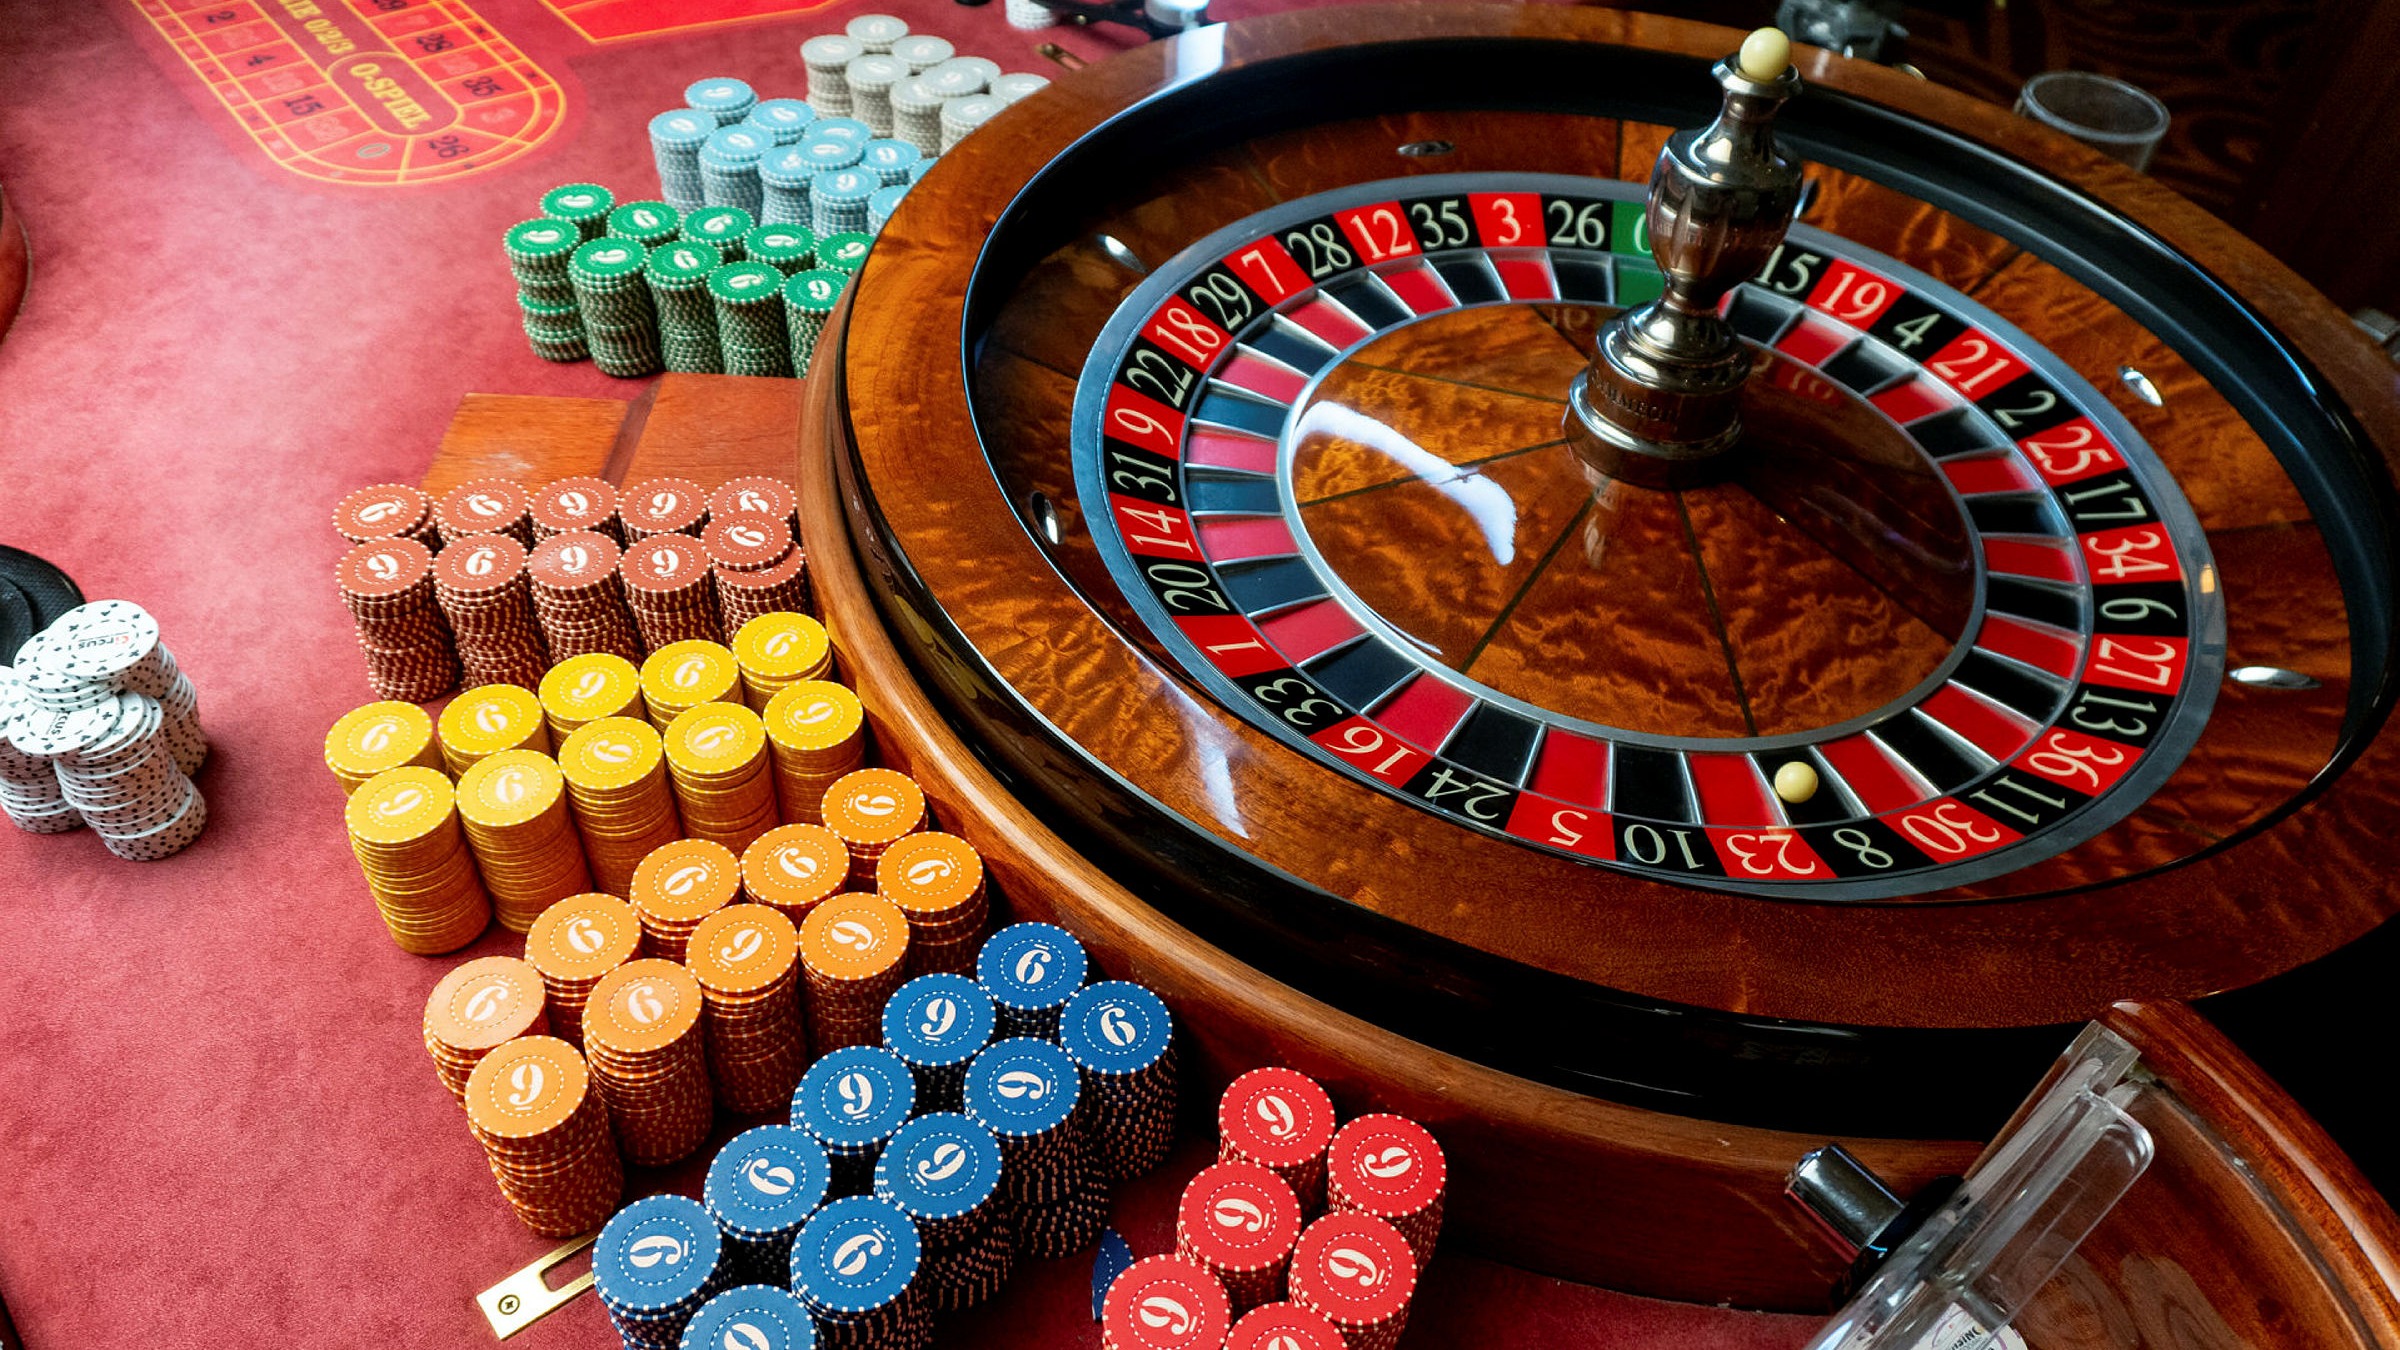 Govt collects Rs 810 million in royalties from casinos